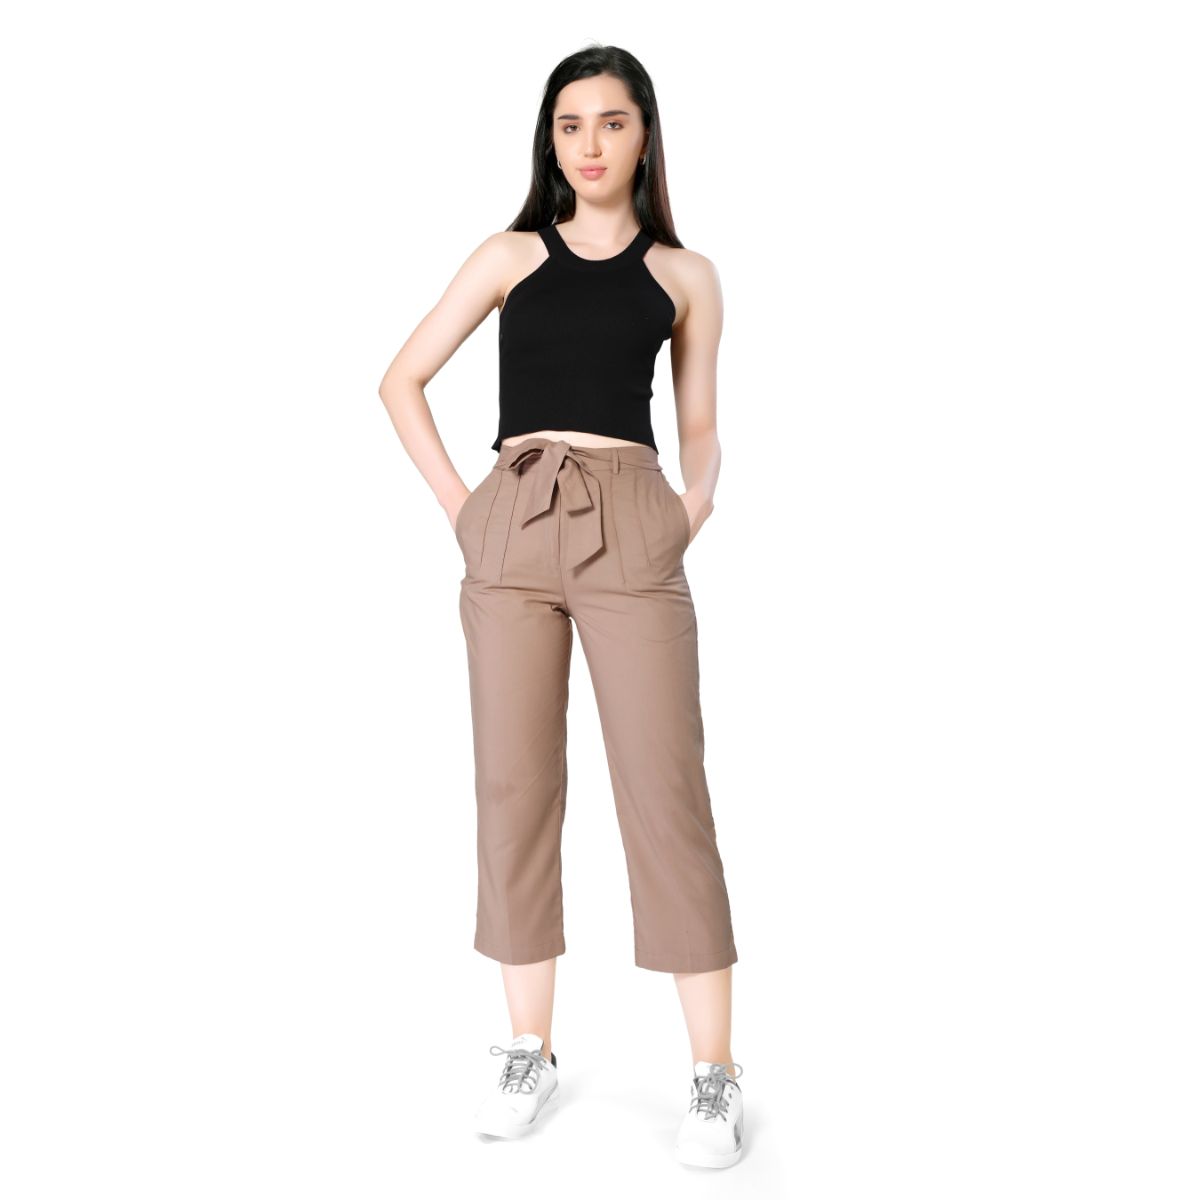 Buy High waist pants with tie-up belt for Women Online in India